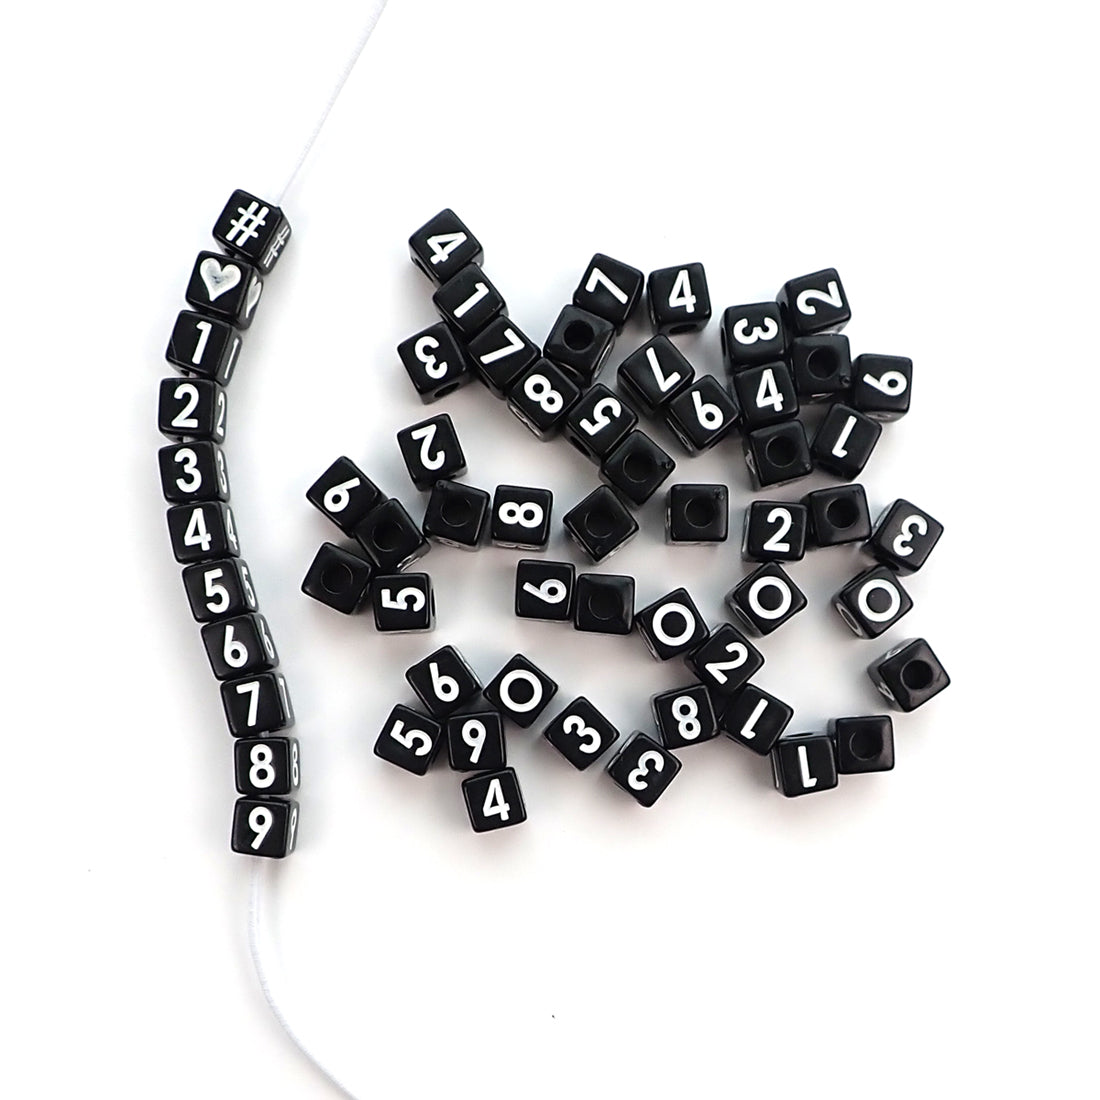 100pcs 8mm Alphabet Letter Beads Charms Bracelet Necklace for Jewelry Making, Girl's, Size: As described